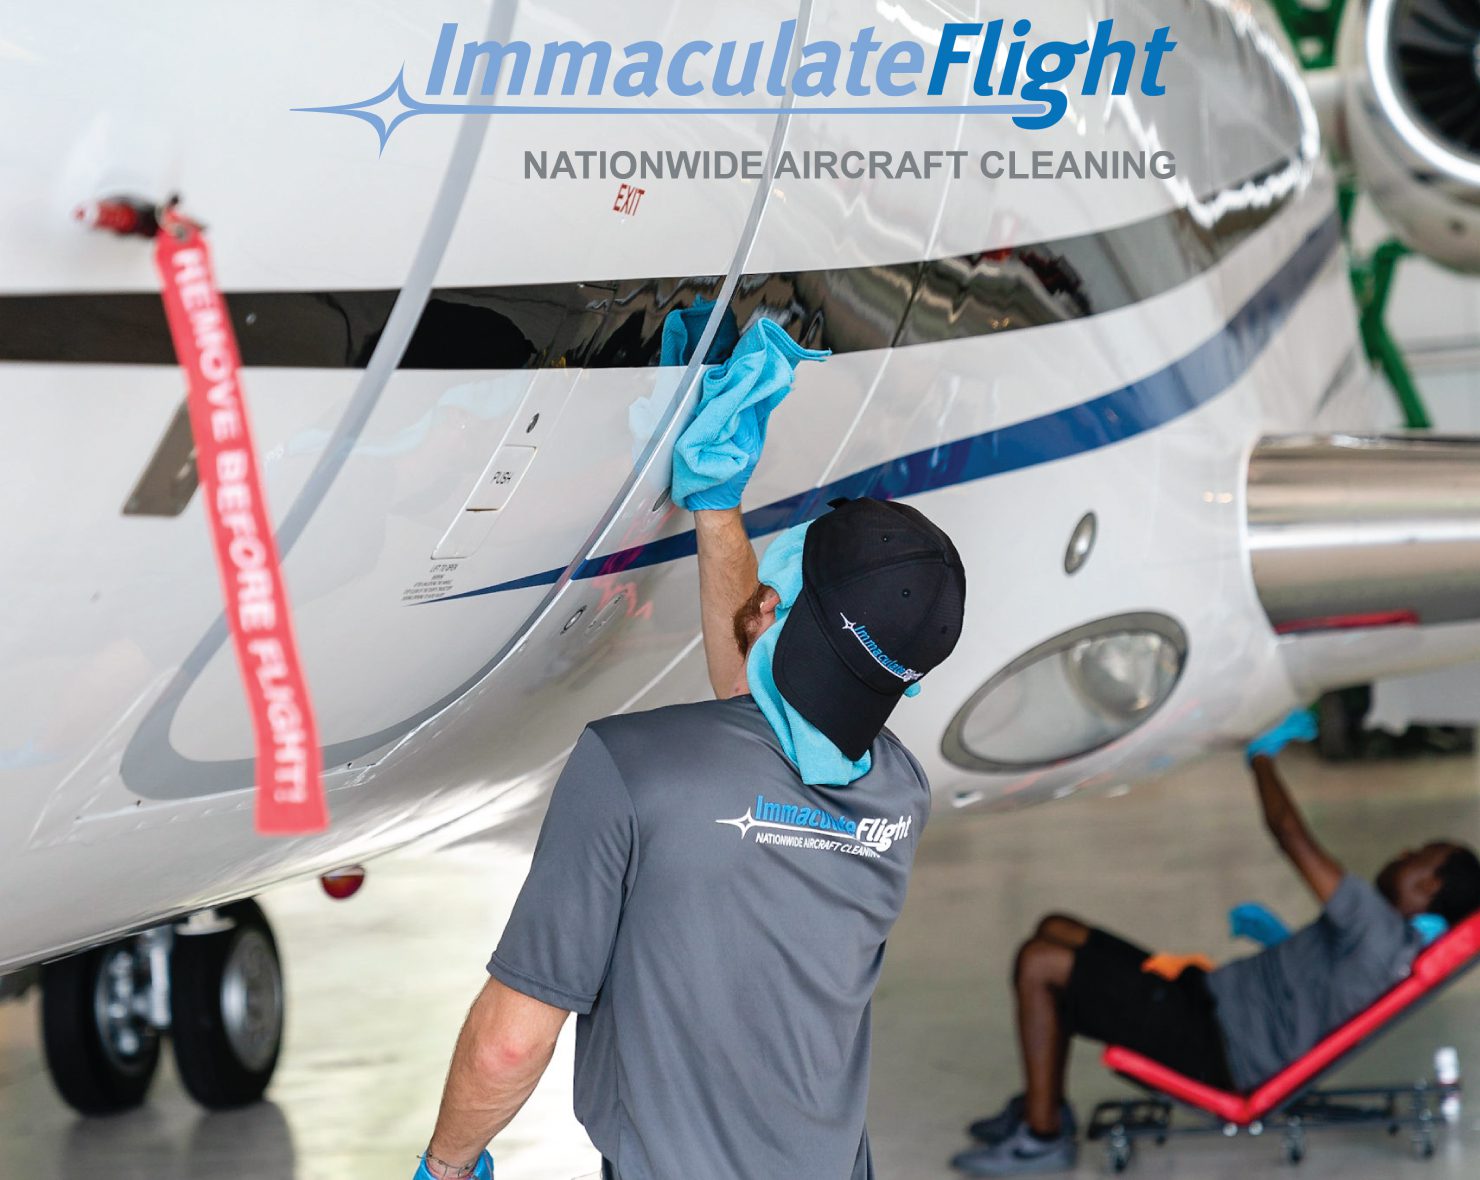 immaculate-flight-press-release-image